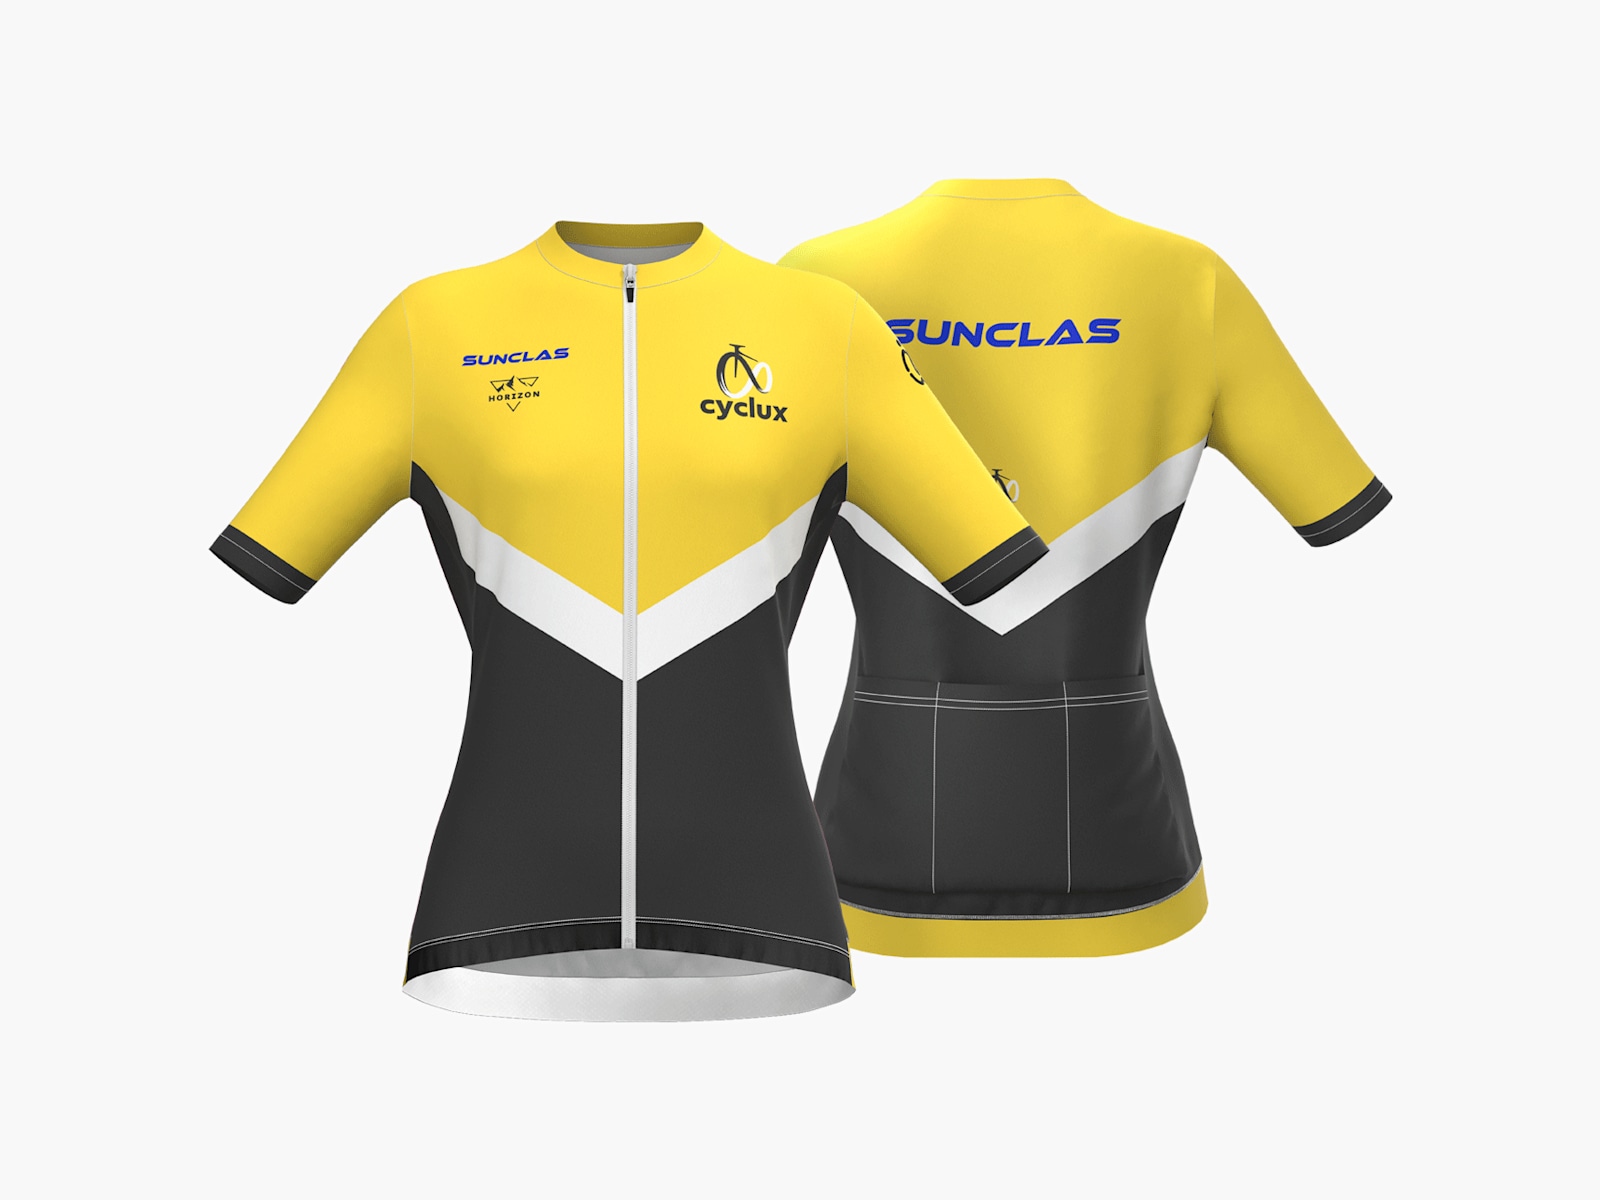 A front and back mannequin shots of a full custom women’s cycling jersey that features the pedala cycling brand and multiple sponsors for a sunglasses cycling and nutri products brands.